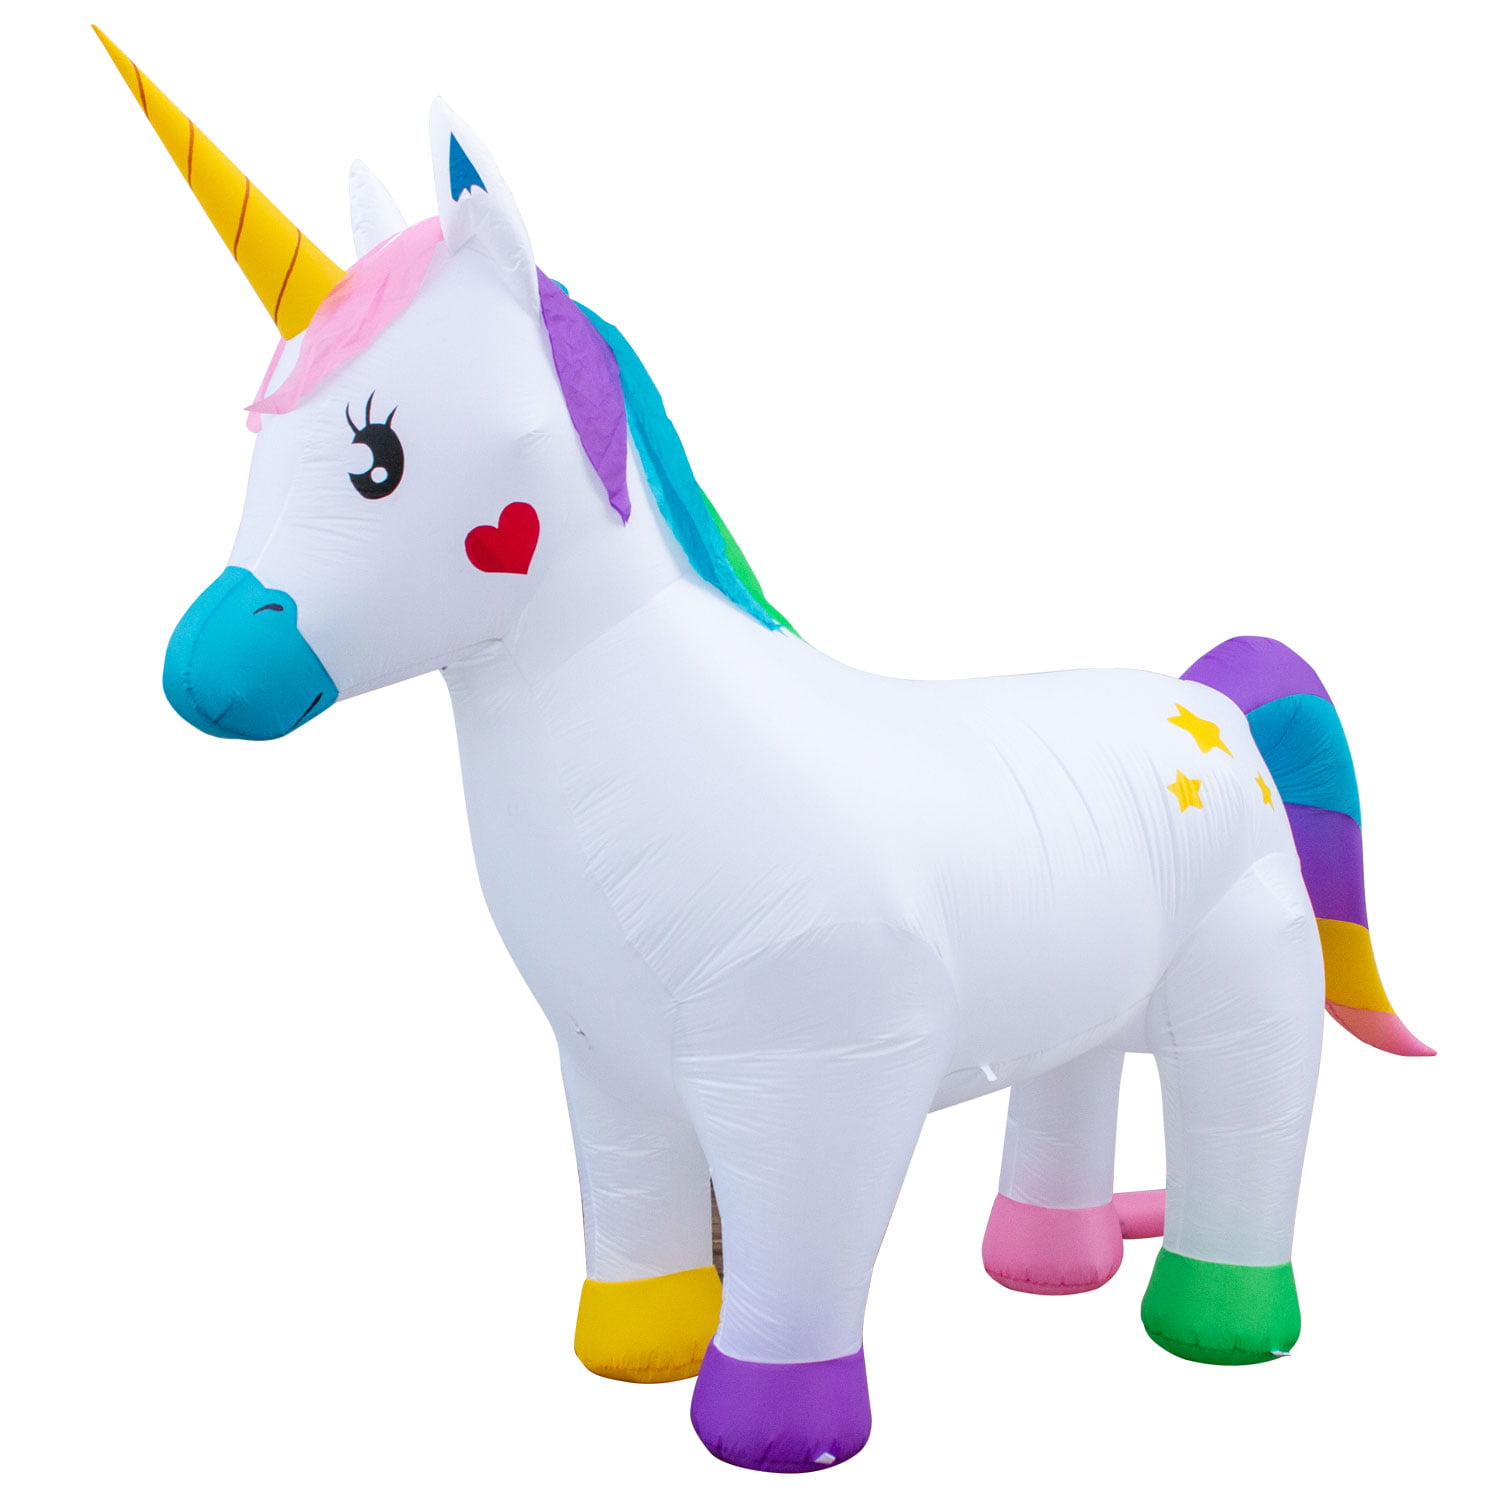 Holidayana 8' Tall Giant Inflatable Magic Unicorn Special Event Yard ...